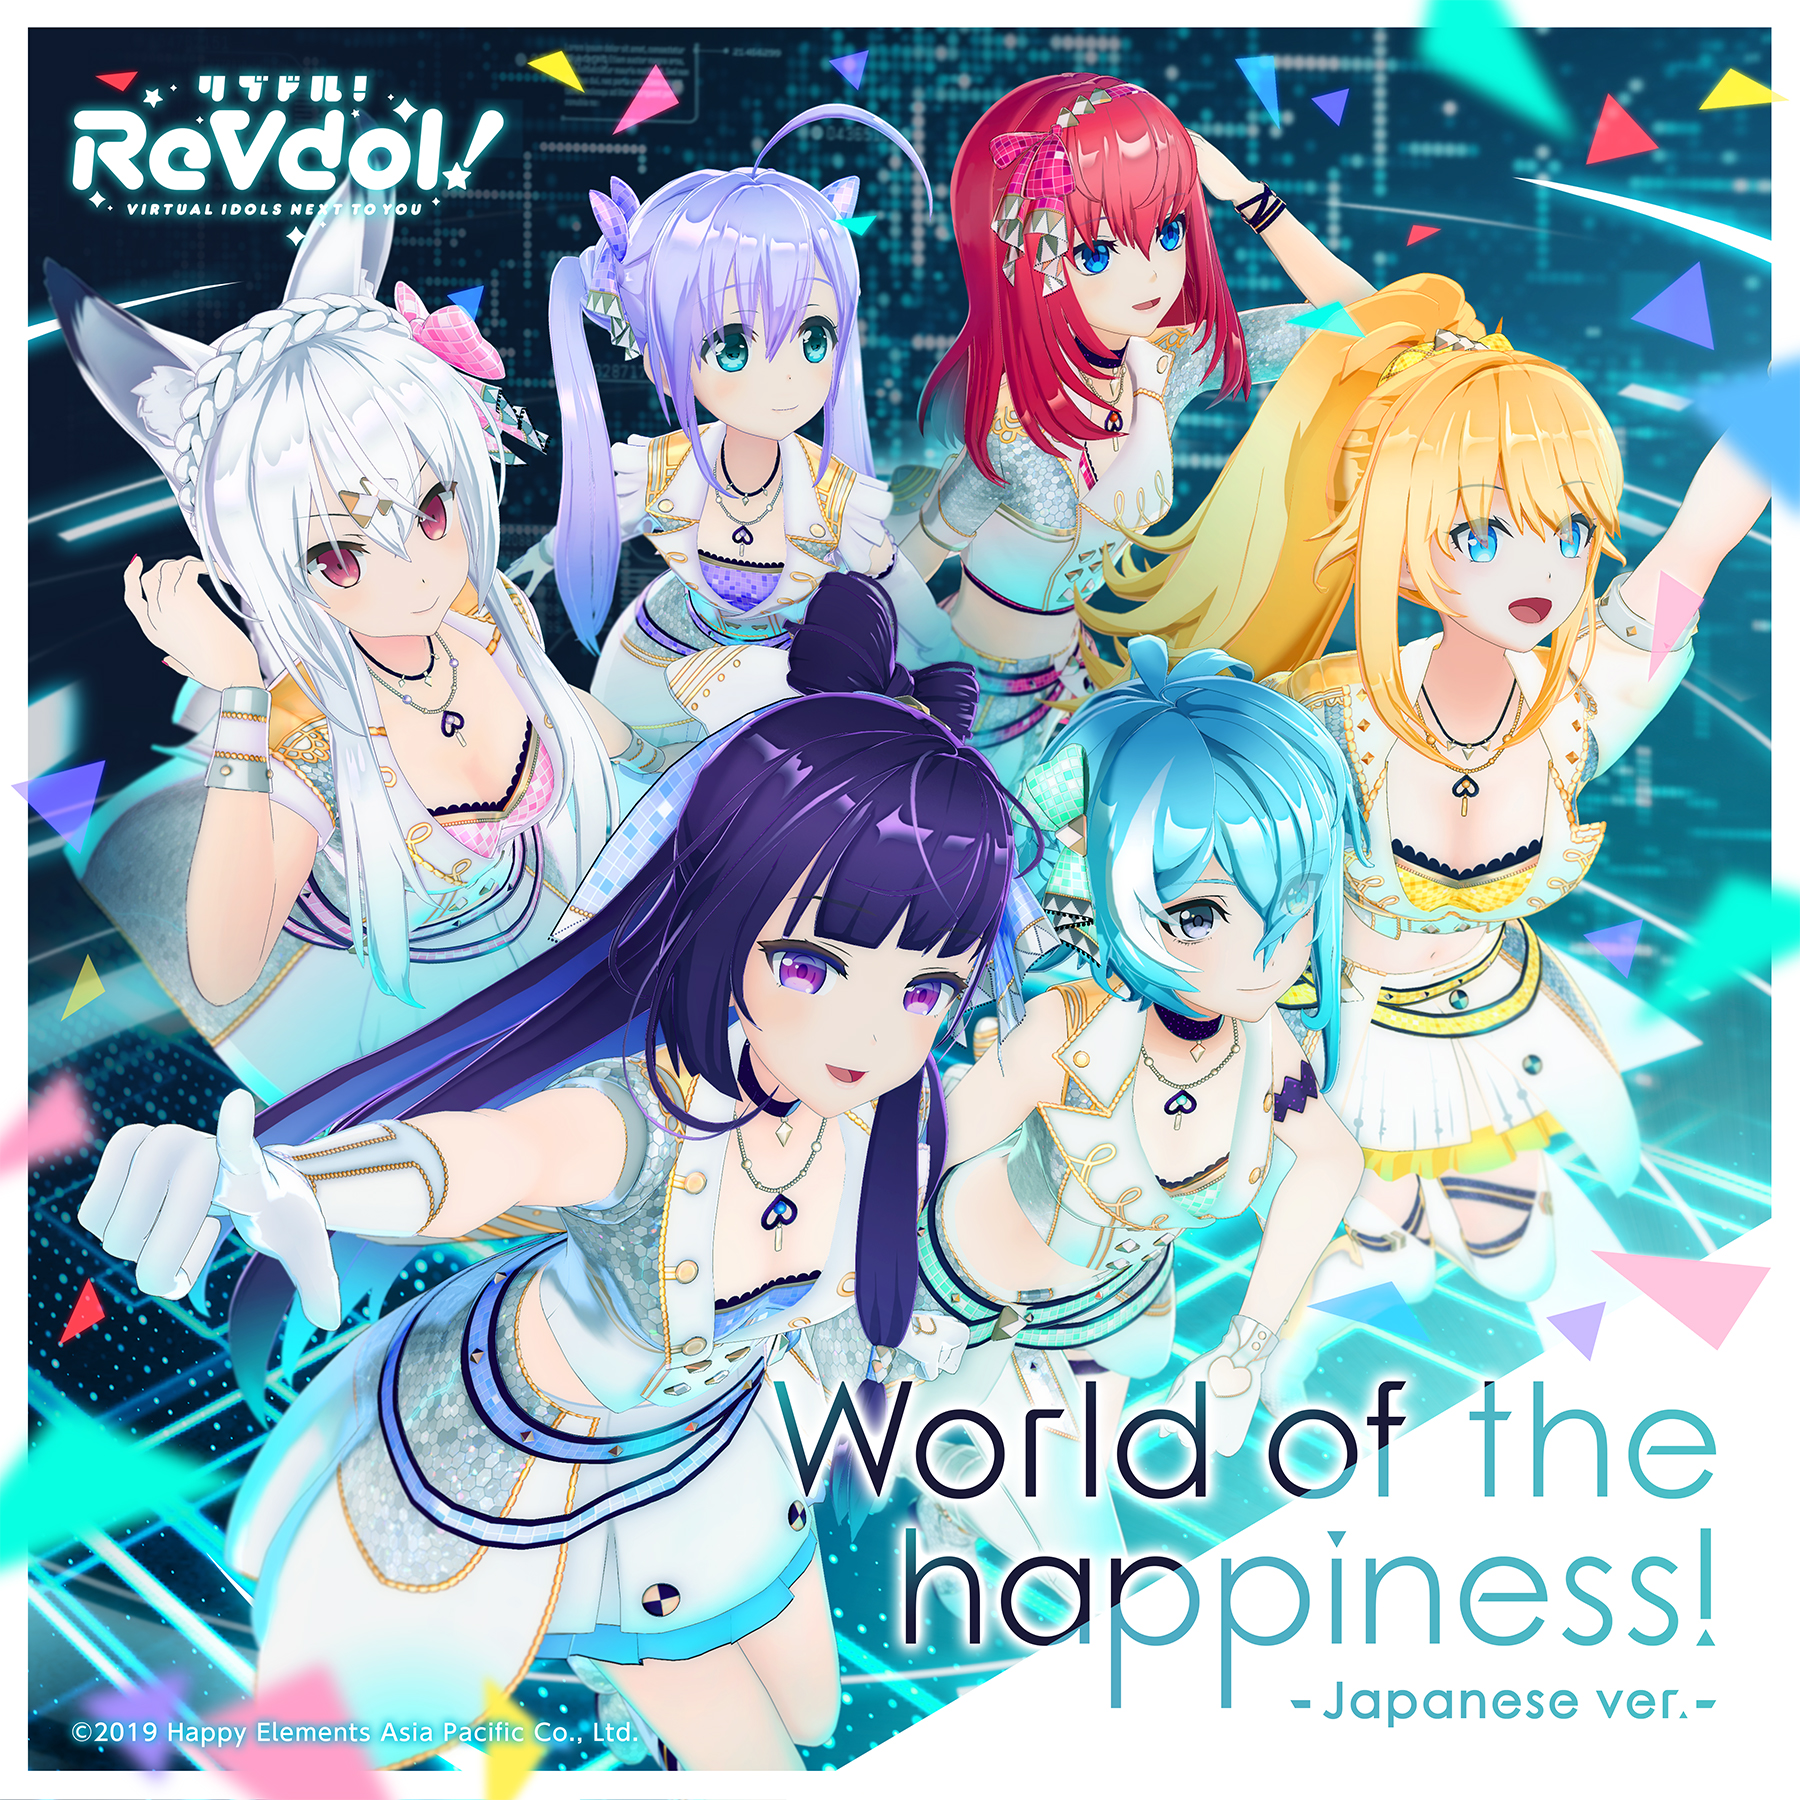 World of the happiness! cover jp.jpg